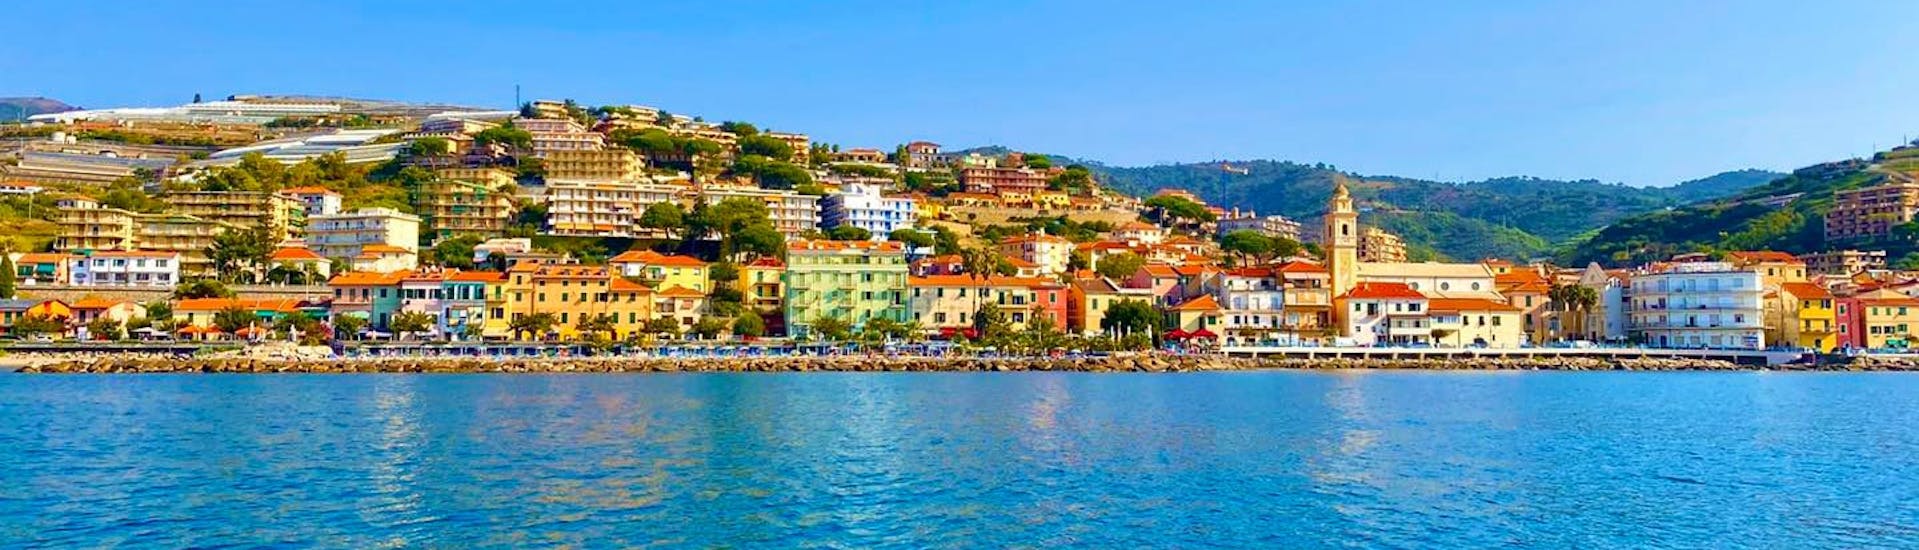 Private Boat Trip from Arma di Taggia with Swimming Stops and Apéritif from Liguria in Barca Sanremo.